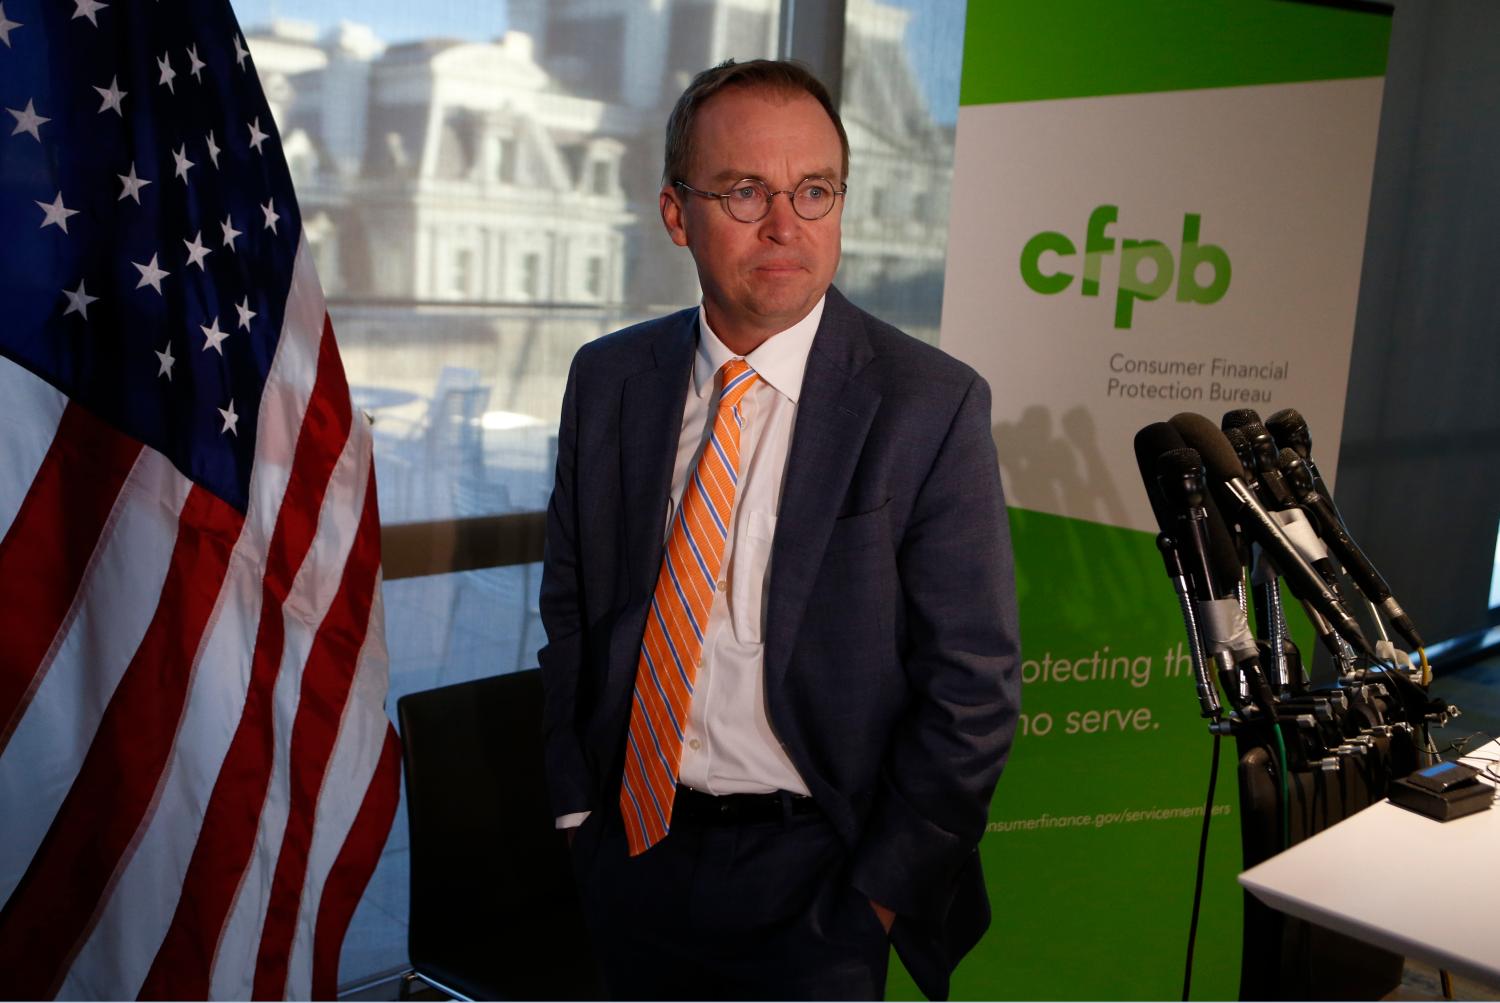 Office of Management and Budget (OMB) Director Mick Mulvaney arrives to speak to the media at the U.S. Consumer Financial Protection Bureau (CFPB), where he began work earlier in the day after being named acting director by U.S. President Donald Trump in Washington November 27, 2017. REUTERS/Joshua Roberts - HP1EDBR1N1A0D